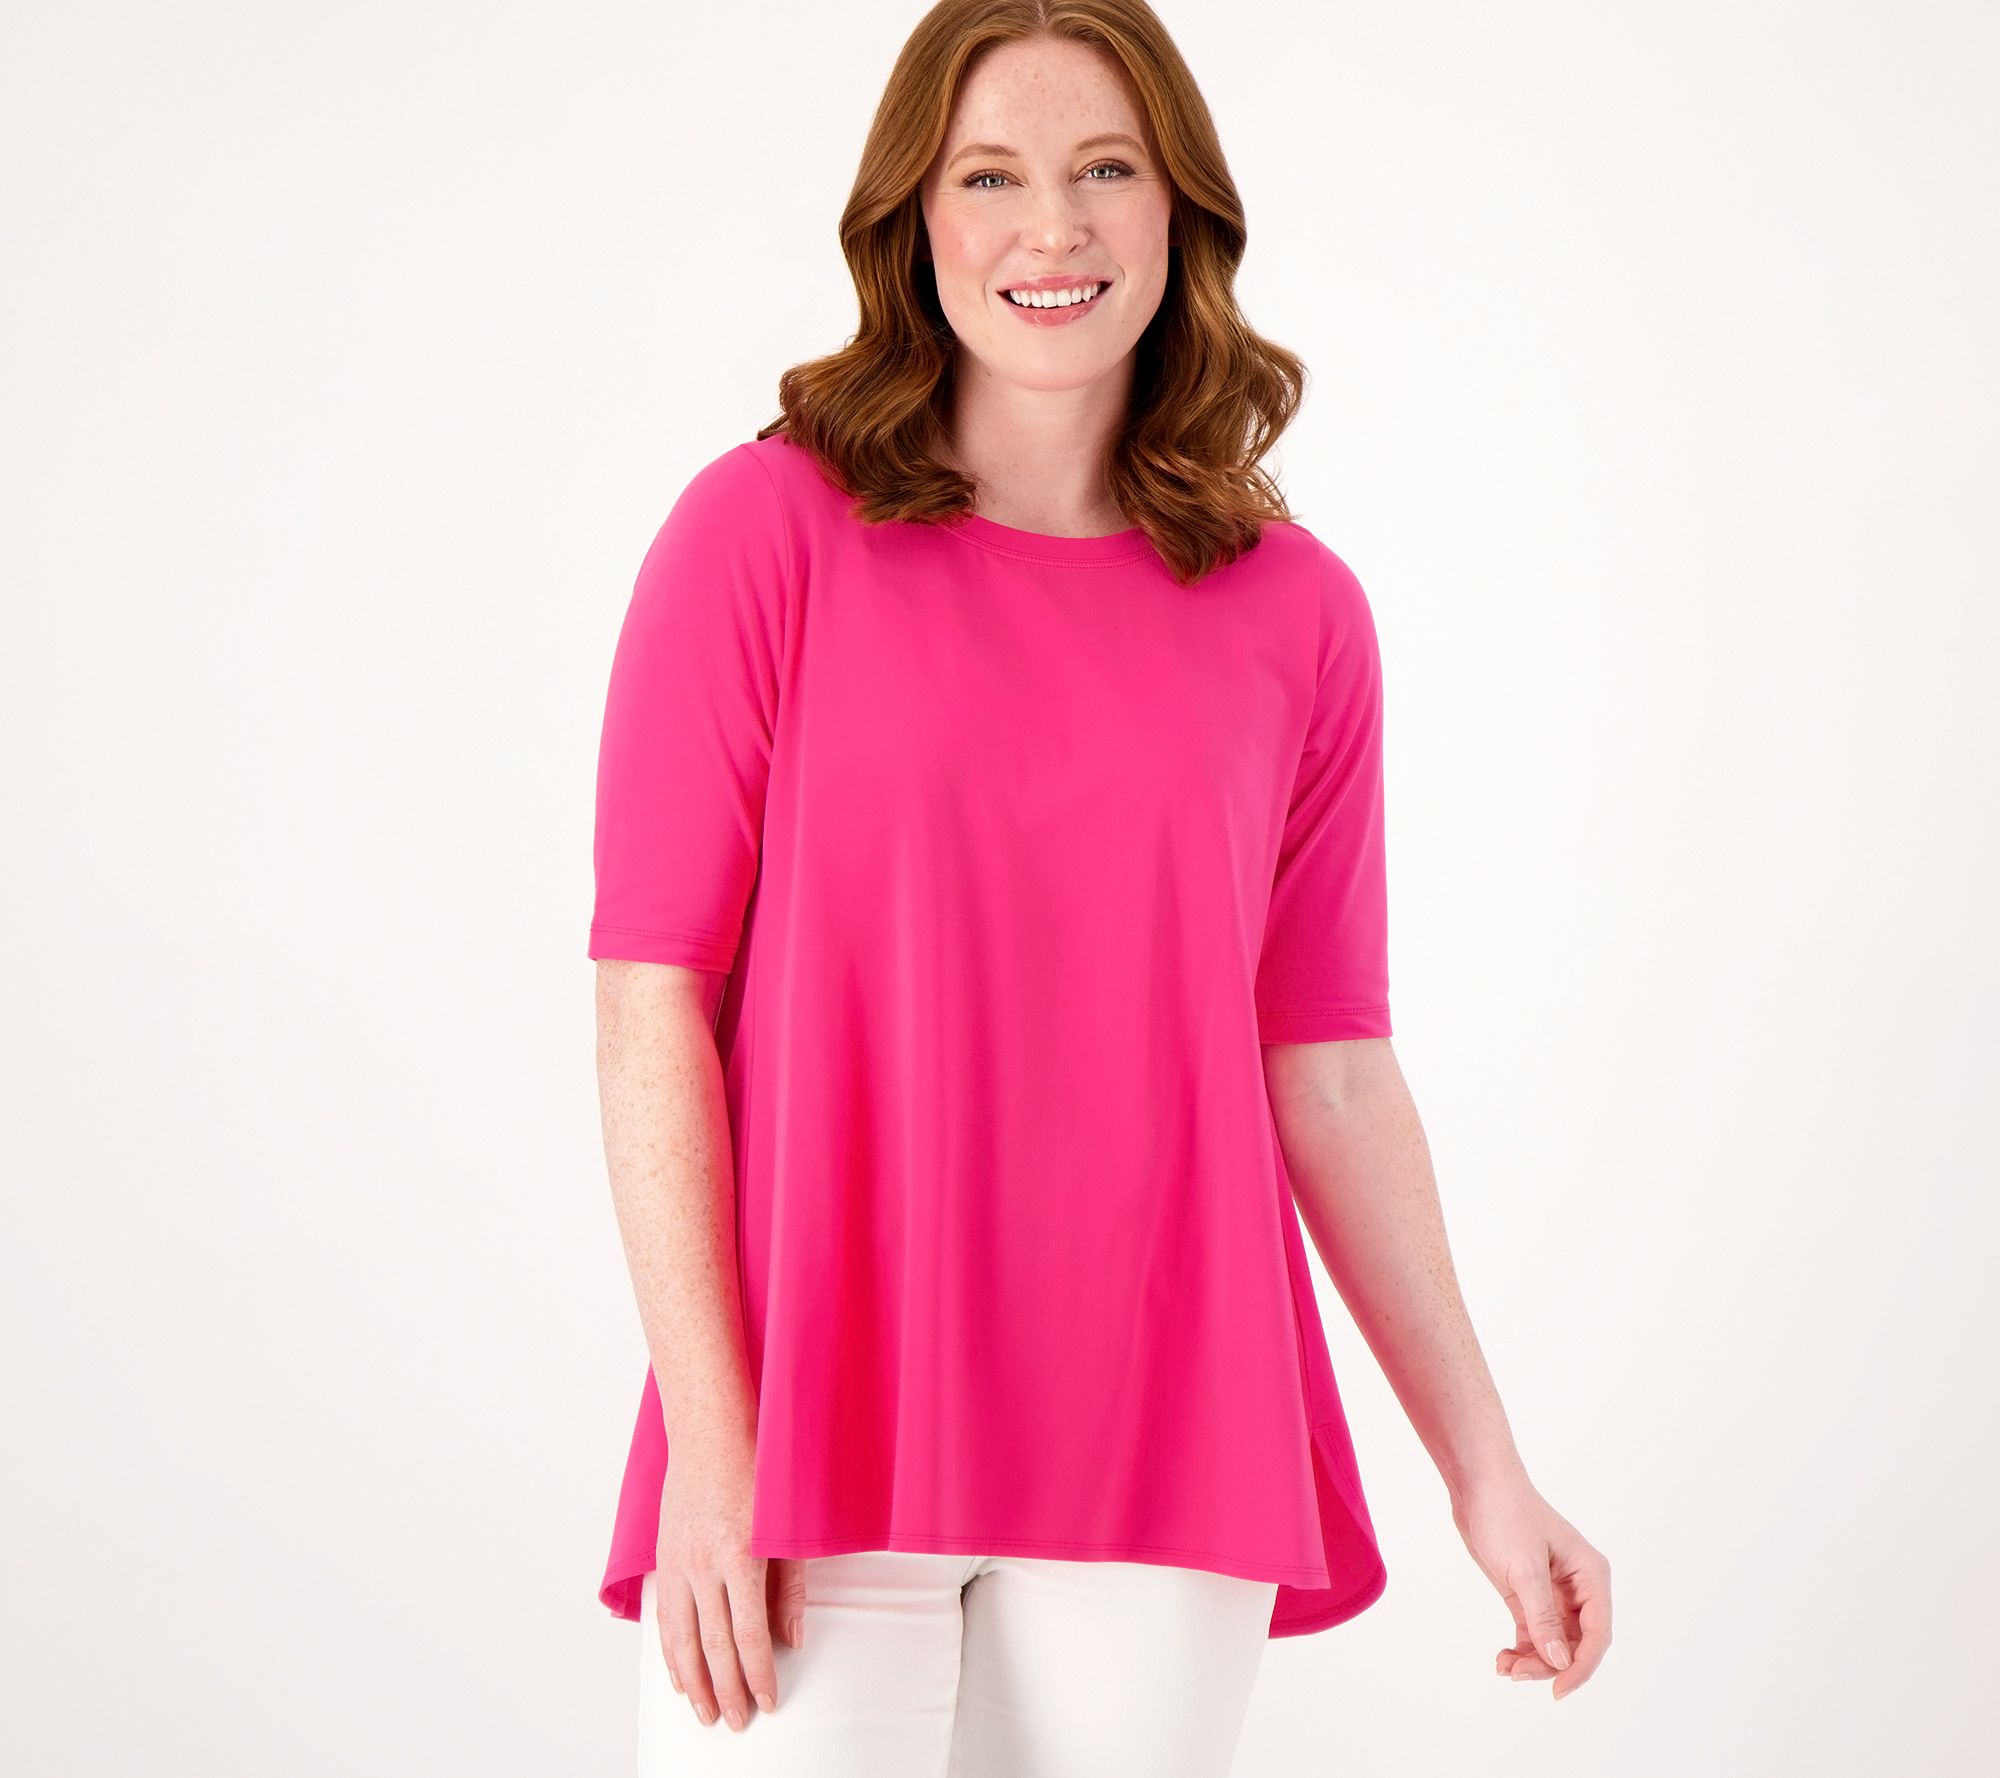 Attitudes by Renee Washed Cotton Crew Neck Top - QVC.com